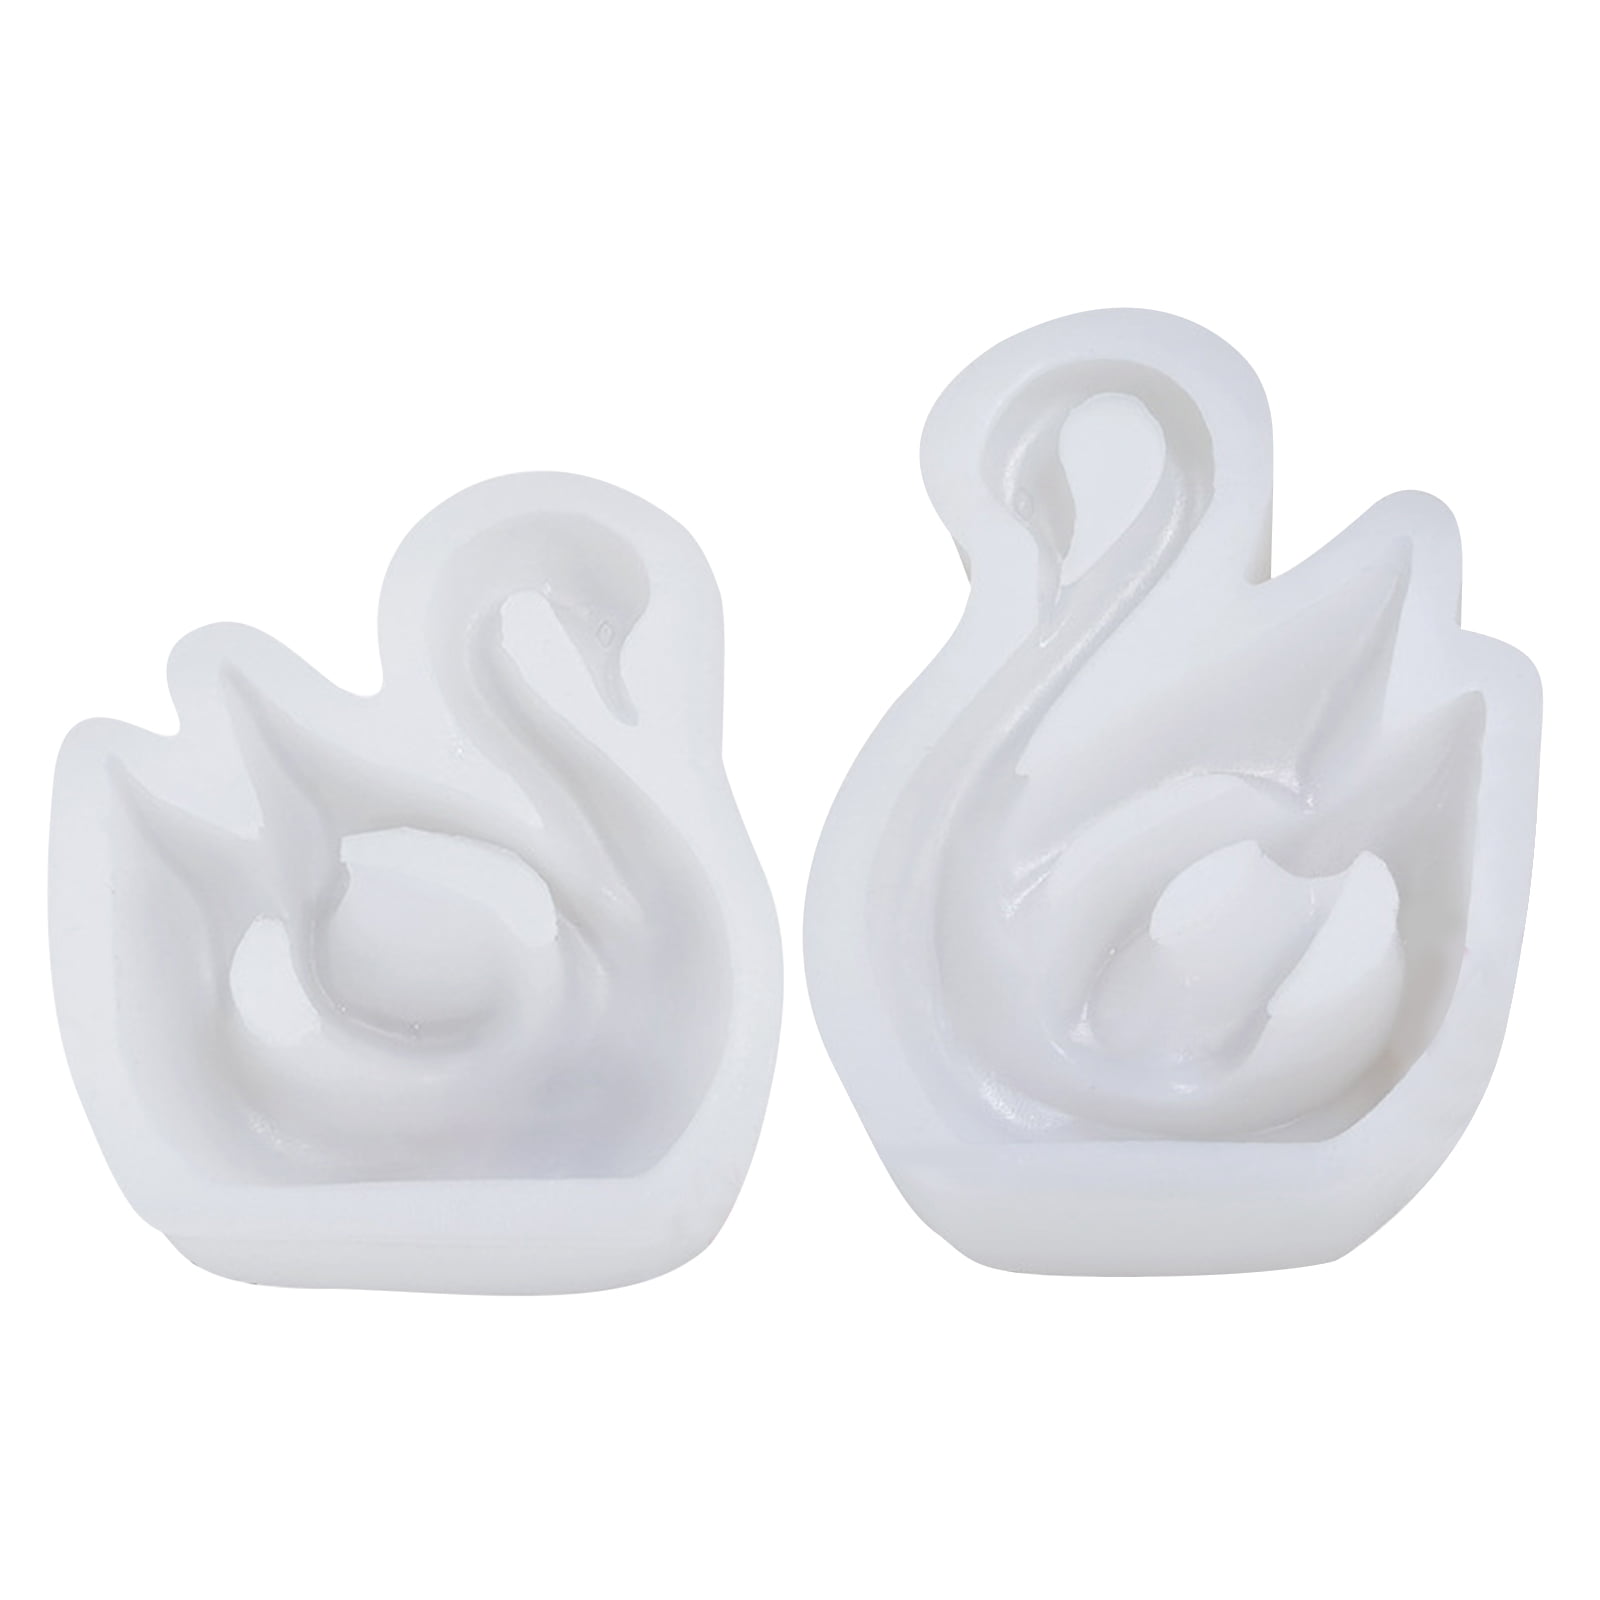 Details about   LARGE SWAN POUR BOX MOLD USA! Make Chocolate/Candy/Cake Decorations at Home 